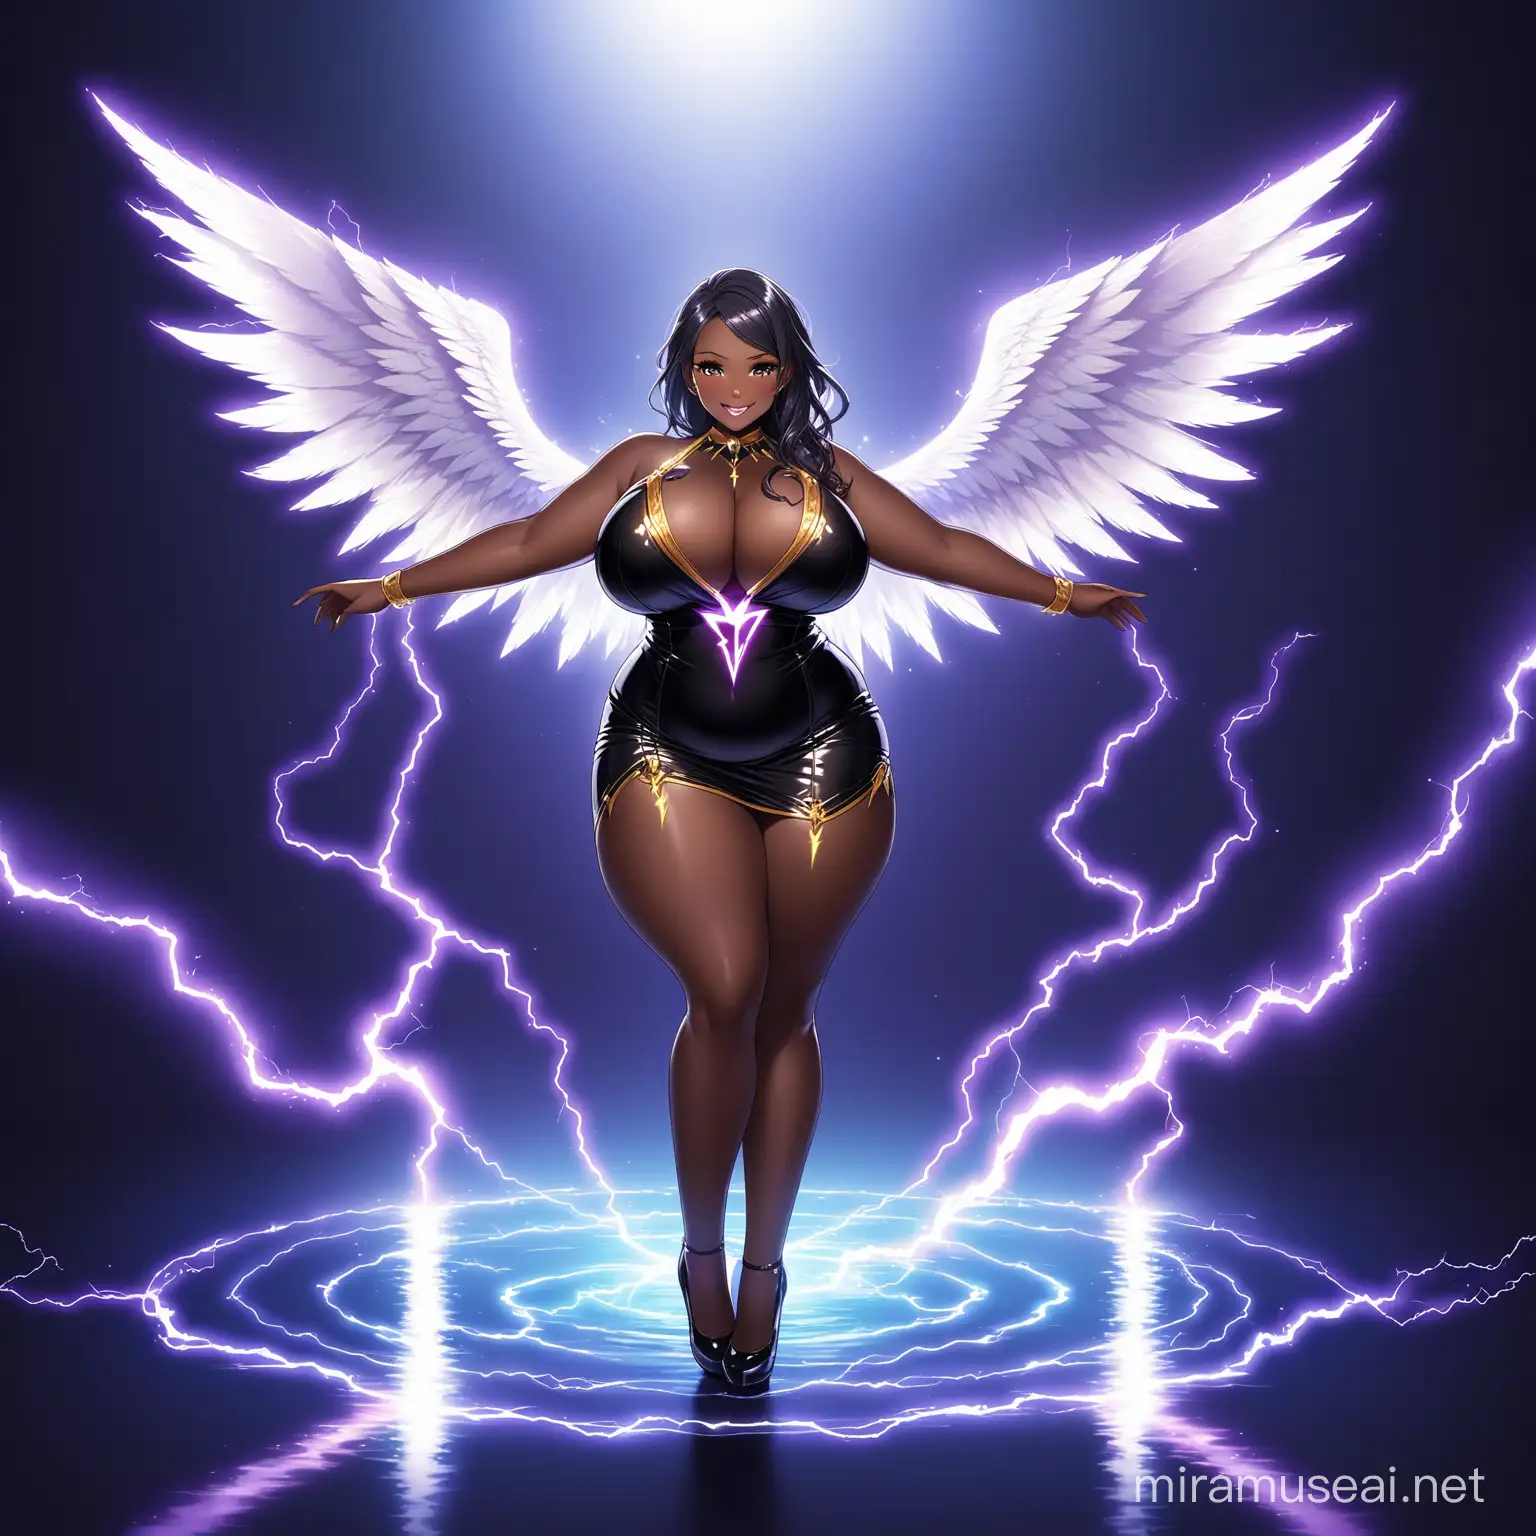 Realist stunning beautiful inticate super idol girl, lightning element, beauty elegant suit dress, background lightning lake, detailed studio photoshoot, studio lighting, focused fullbody dress, bright black skin, angel beauty face, huge busty oversize chubby boobs, charming, seductive smile, looking into viewer, standing in mid air